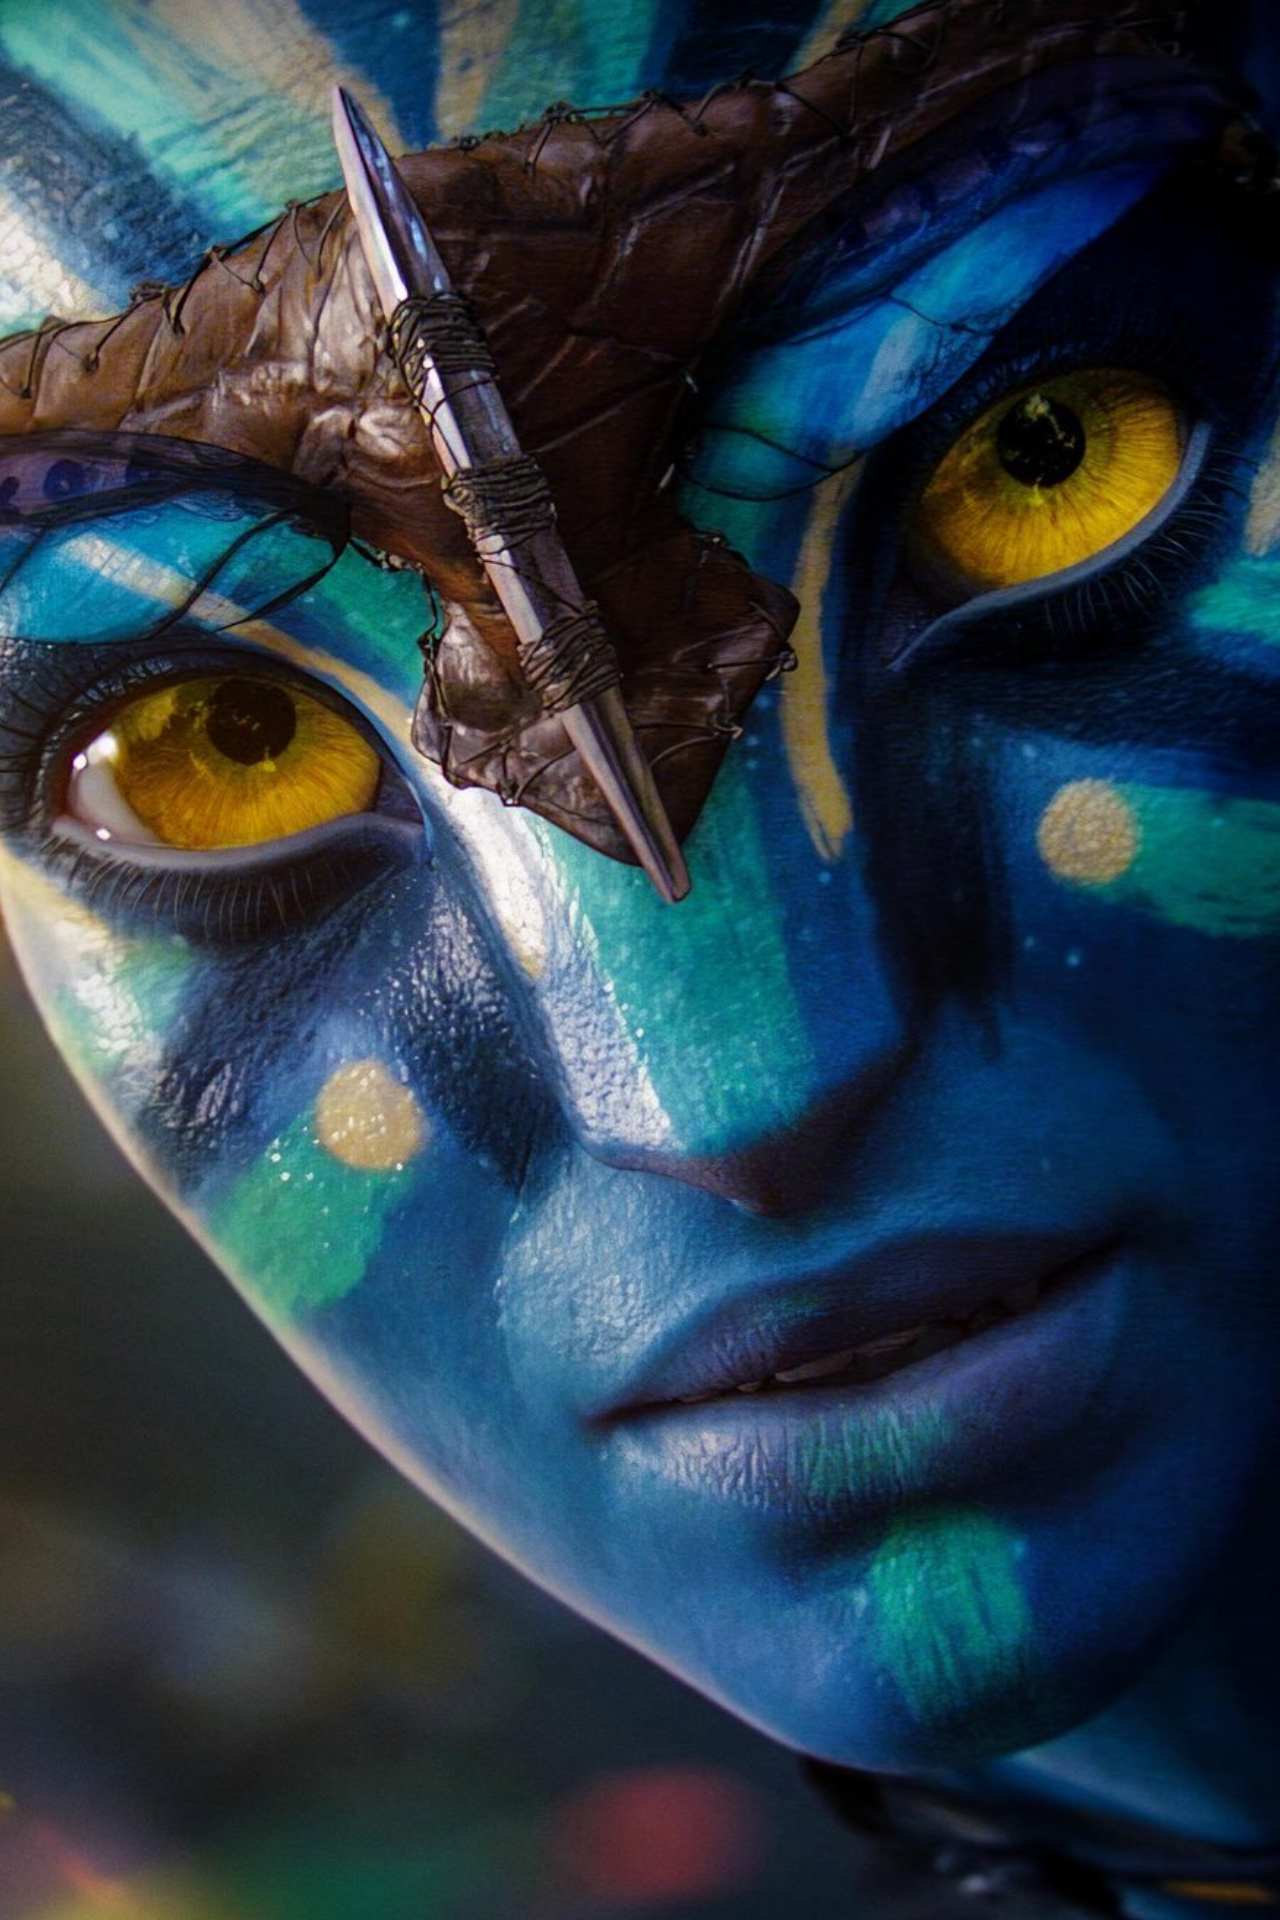 Actors who gave life to the powerful characters of Avatar